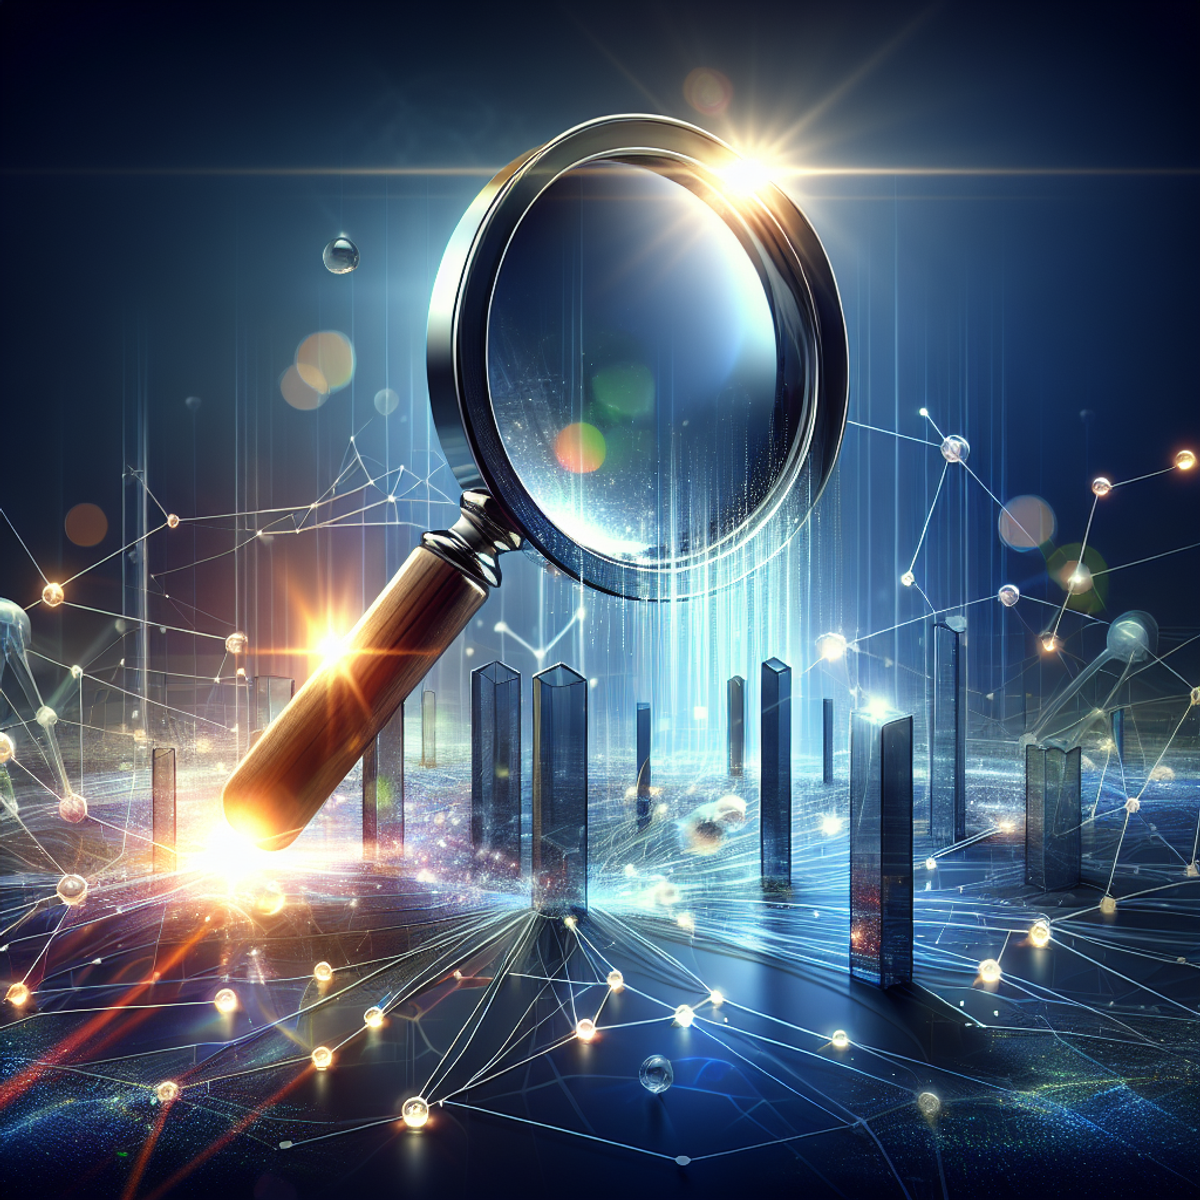 A large, polished magnifying glass hovers over interconnected nodes, symbolizing the vast internet. The magnifying glass is illuminated, uncovering hidden digital opportunities. Transparent obstacles imply SEO challenges, suggesting they can be overcome.